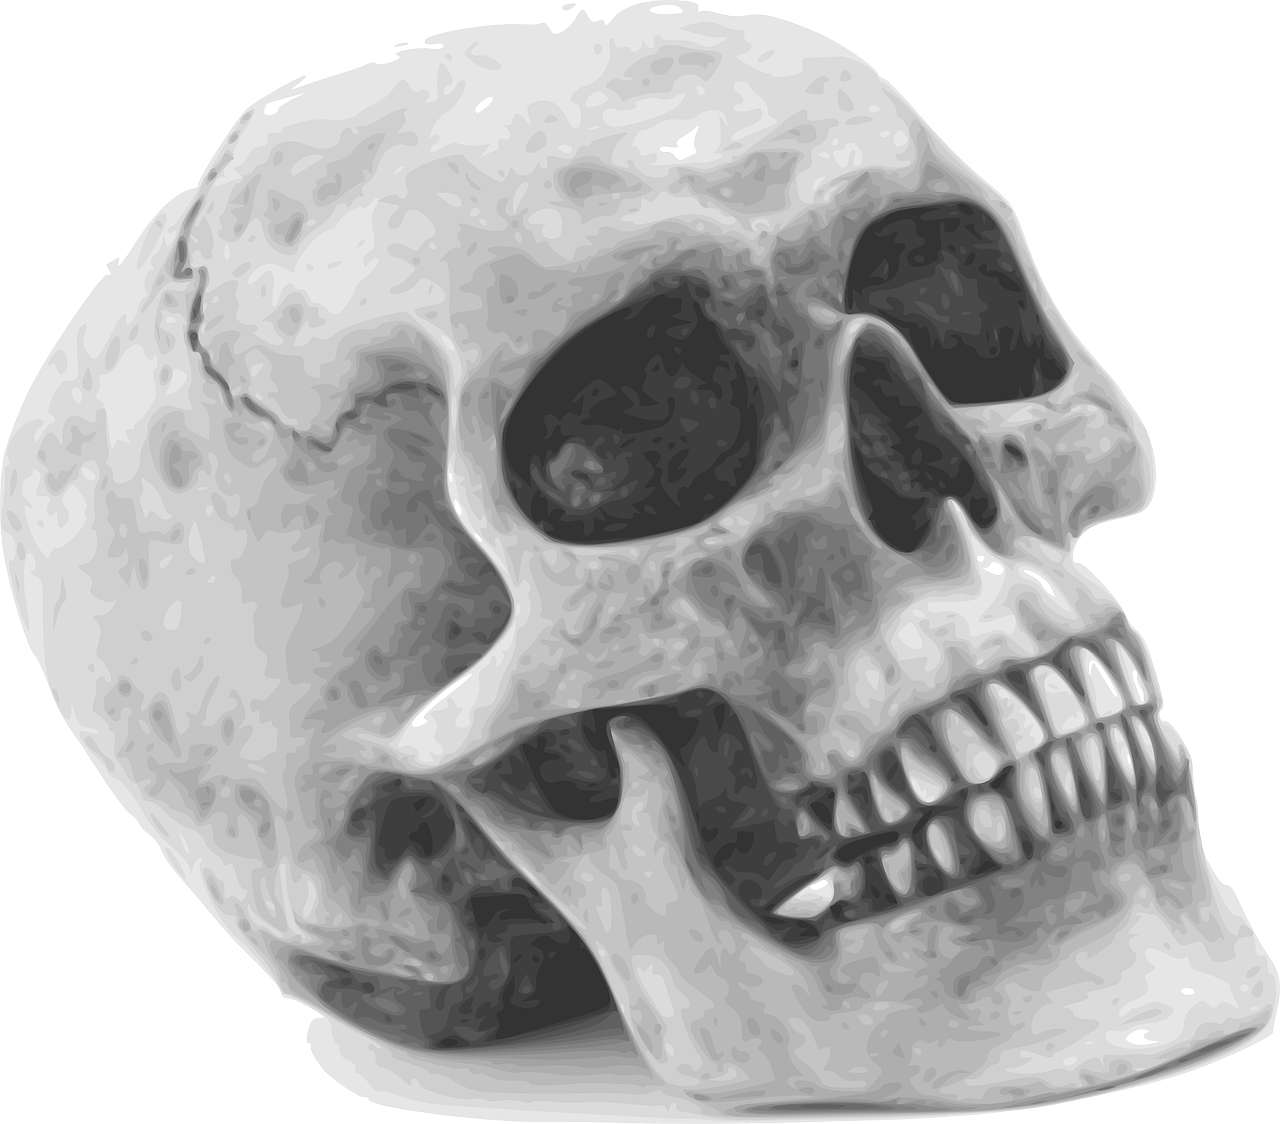 Humanskull Download Free PNG